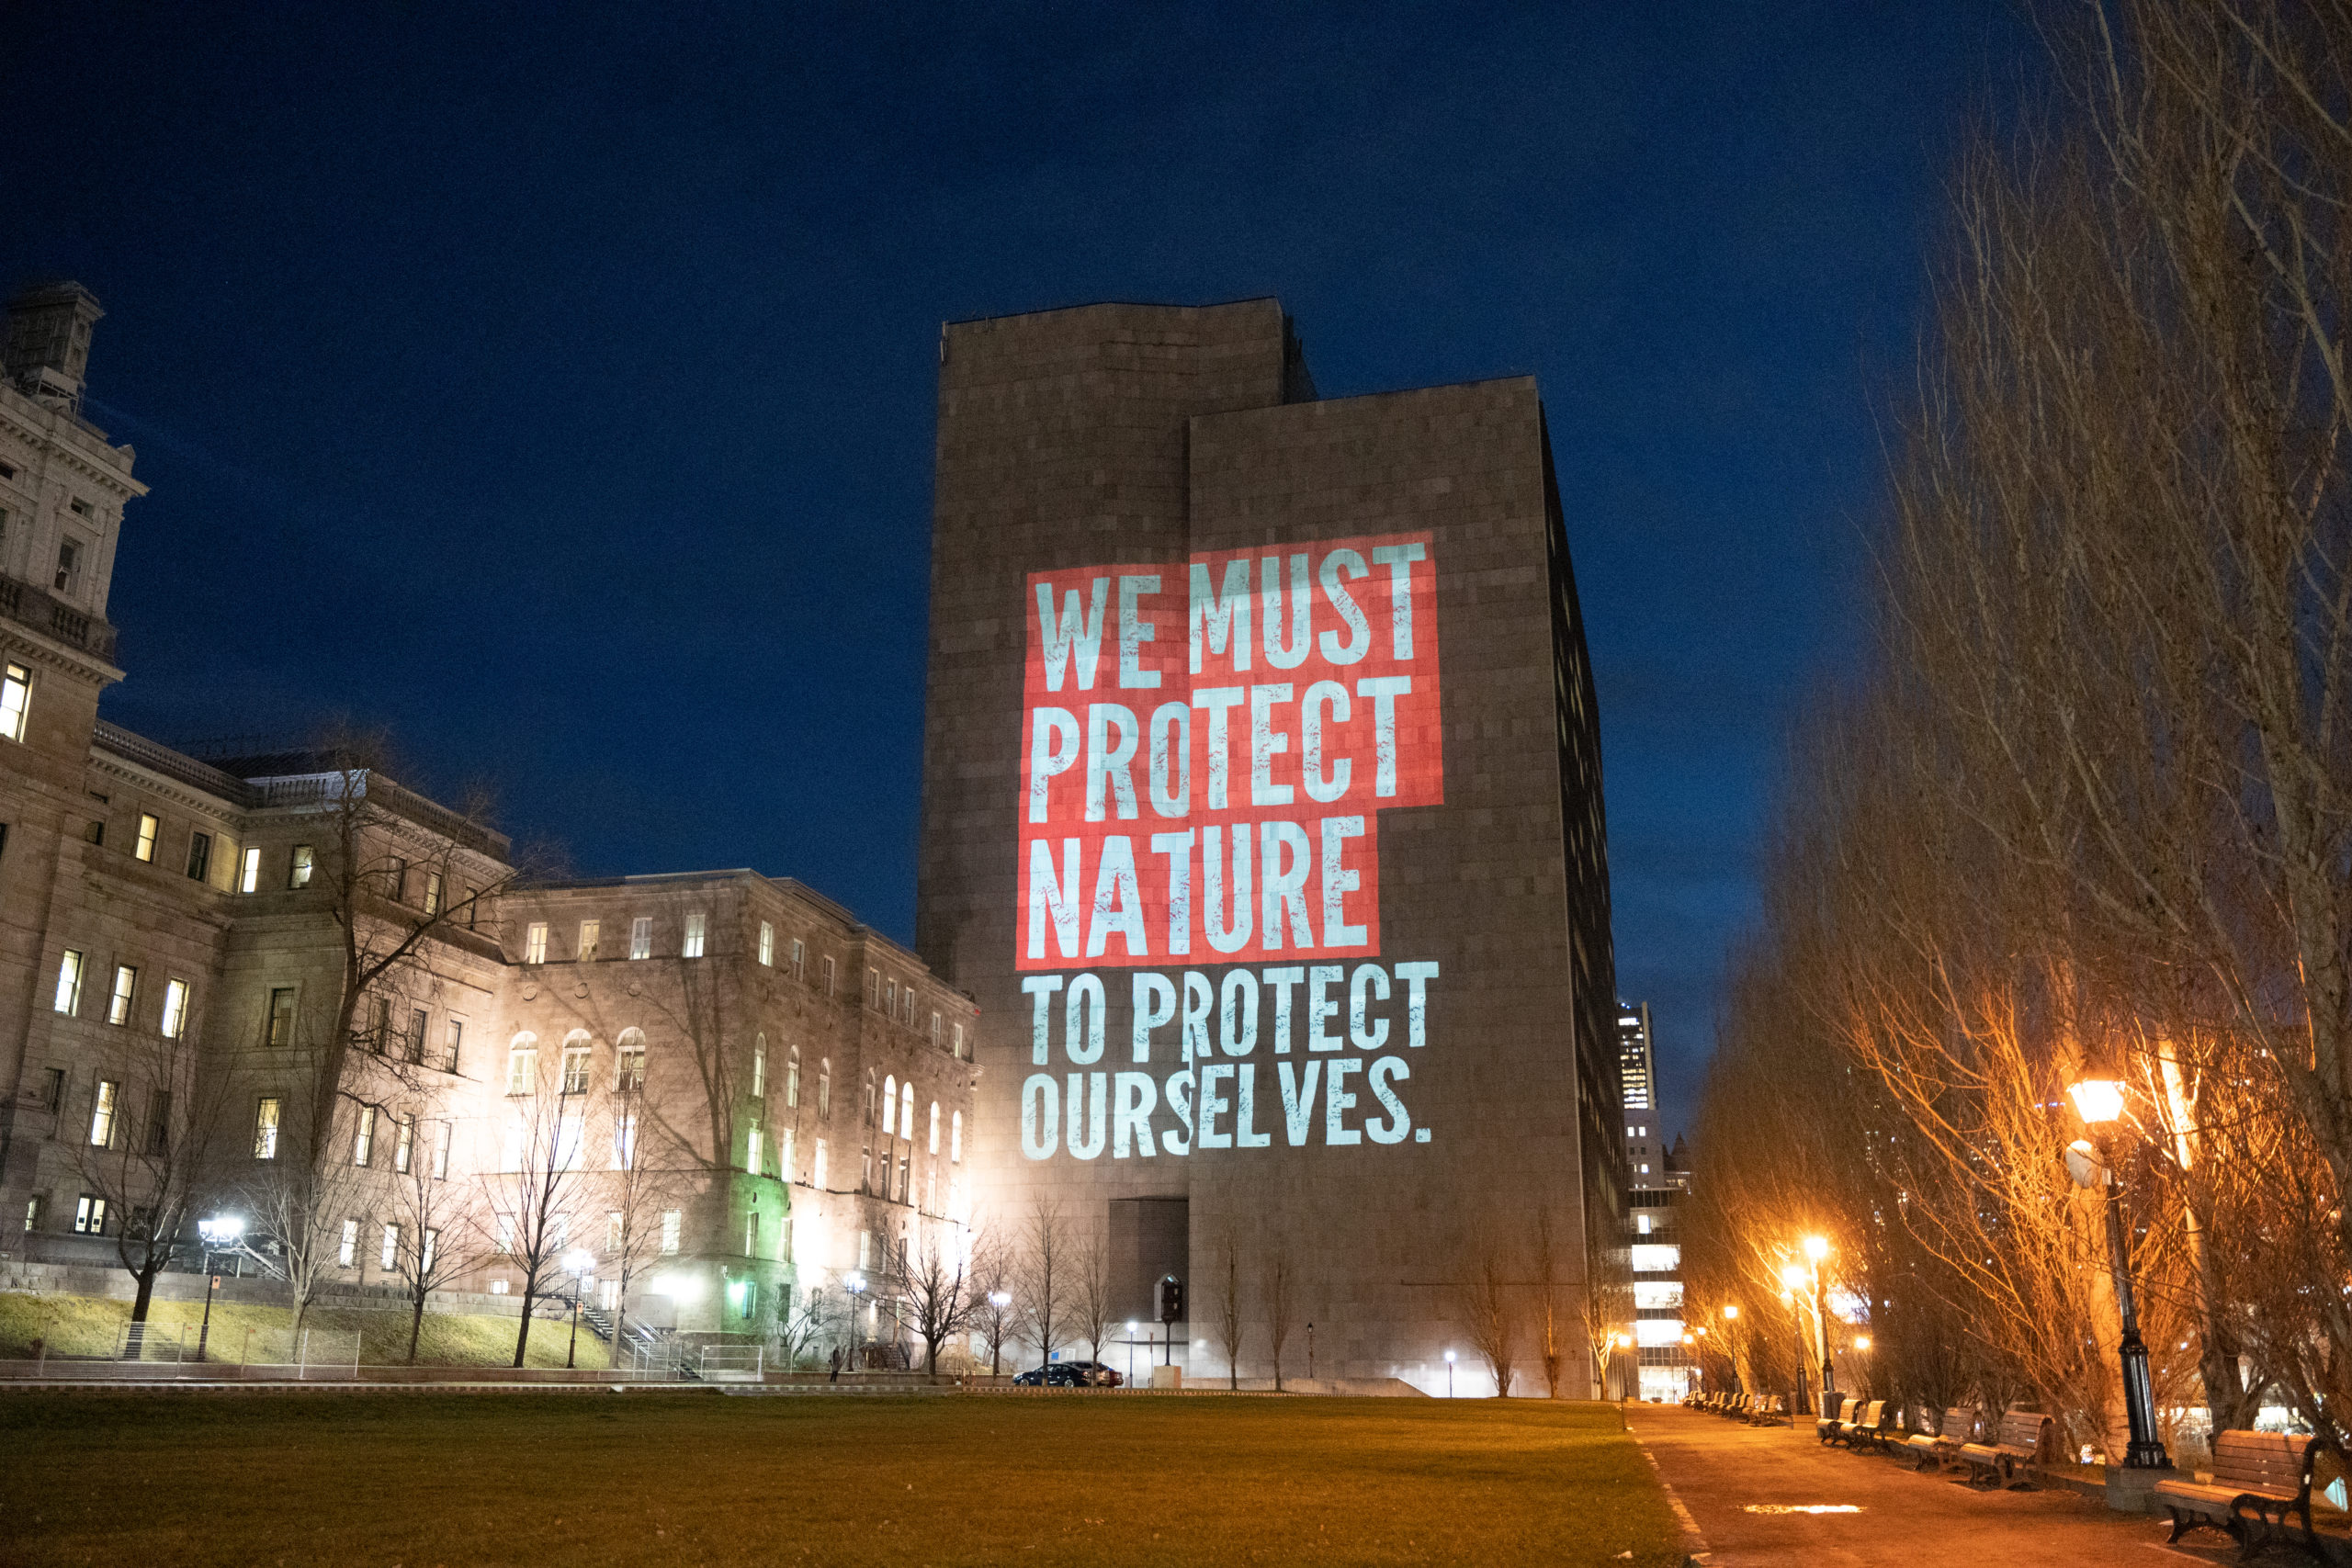 Projection on building wall that reads We must protect nature to protect ourselves